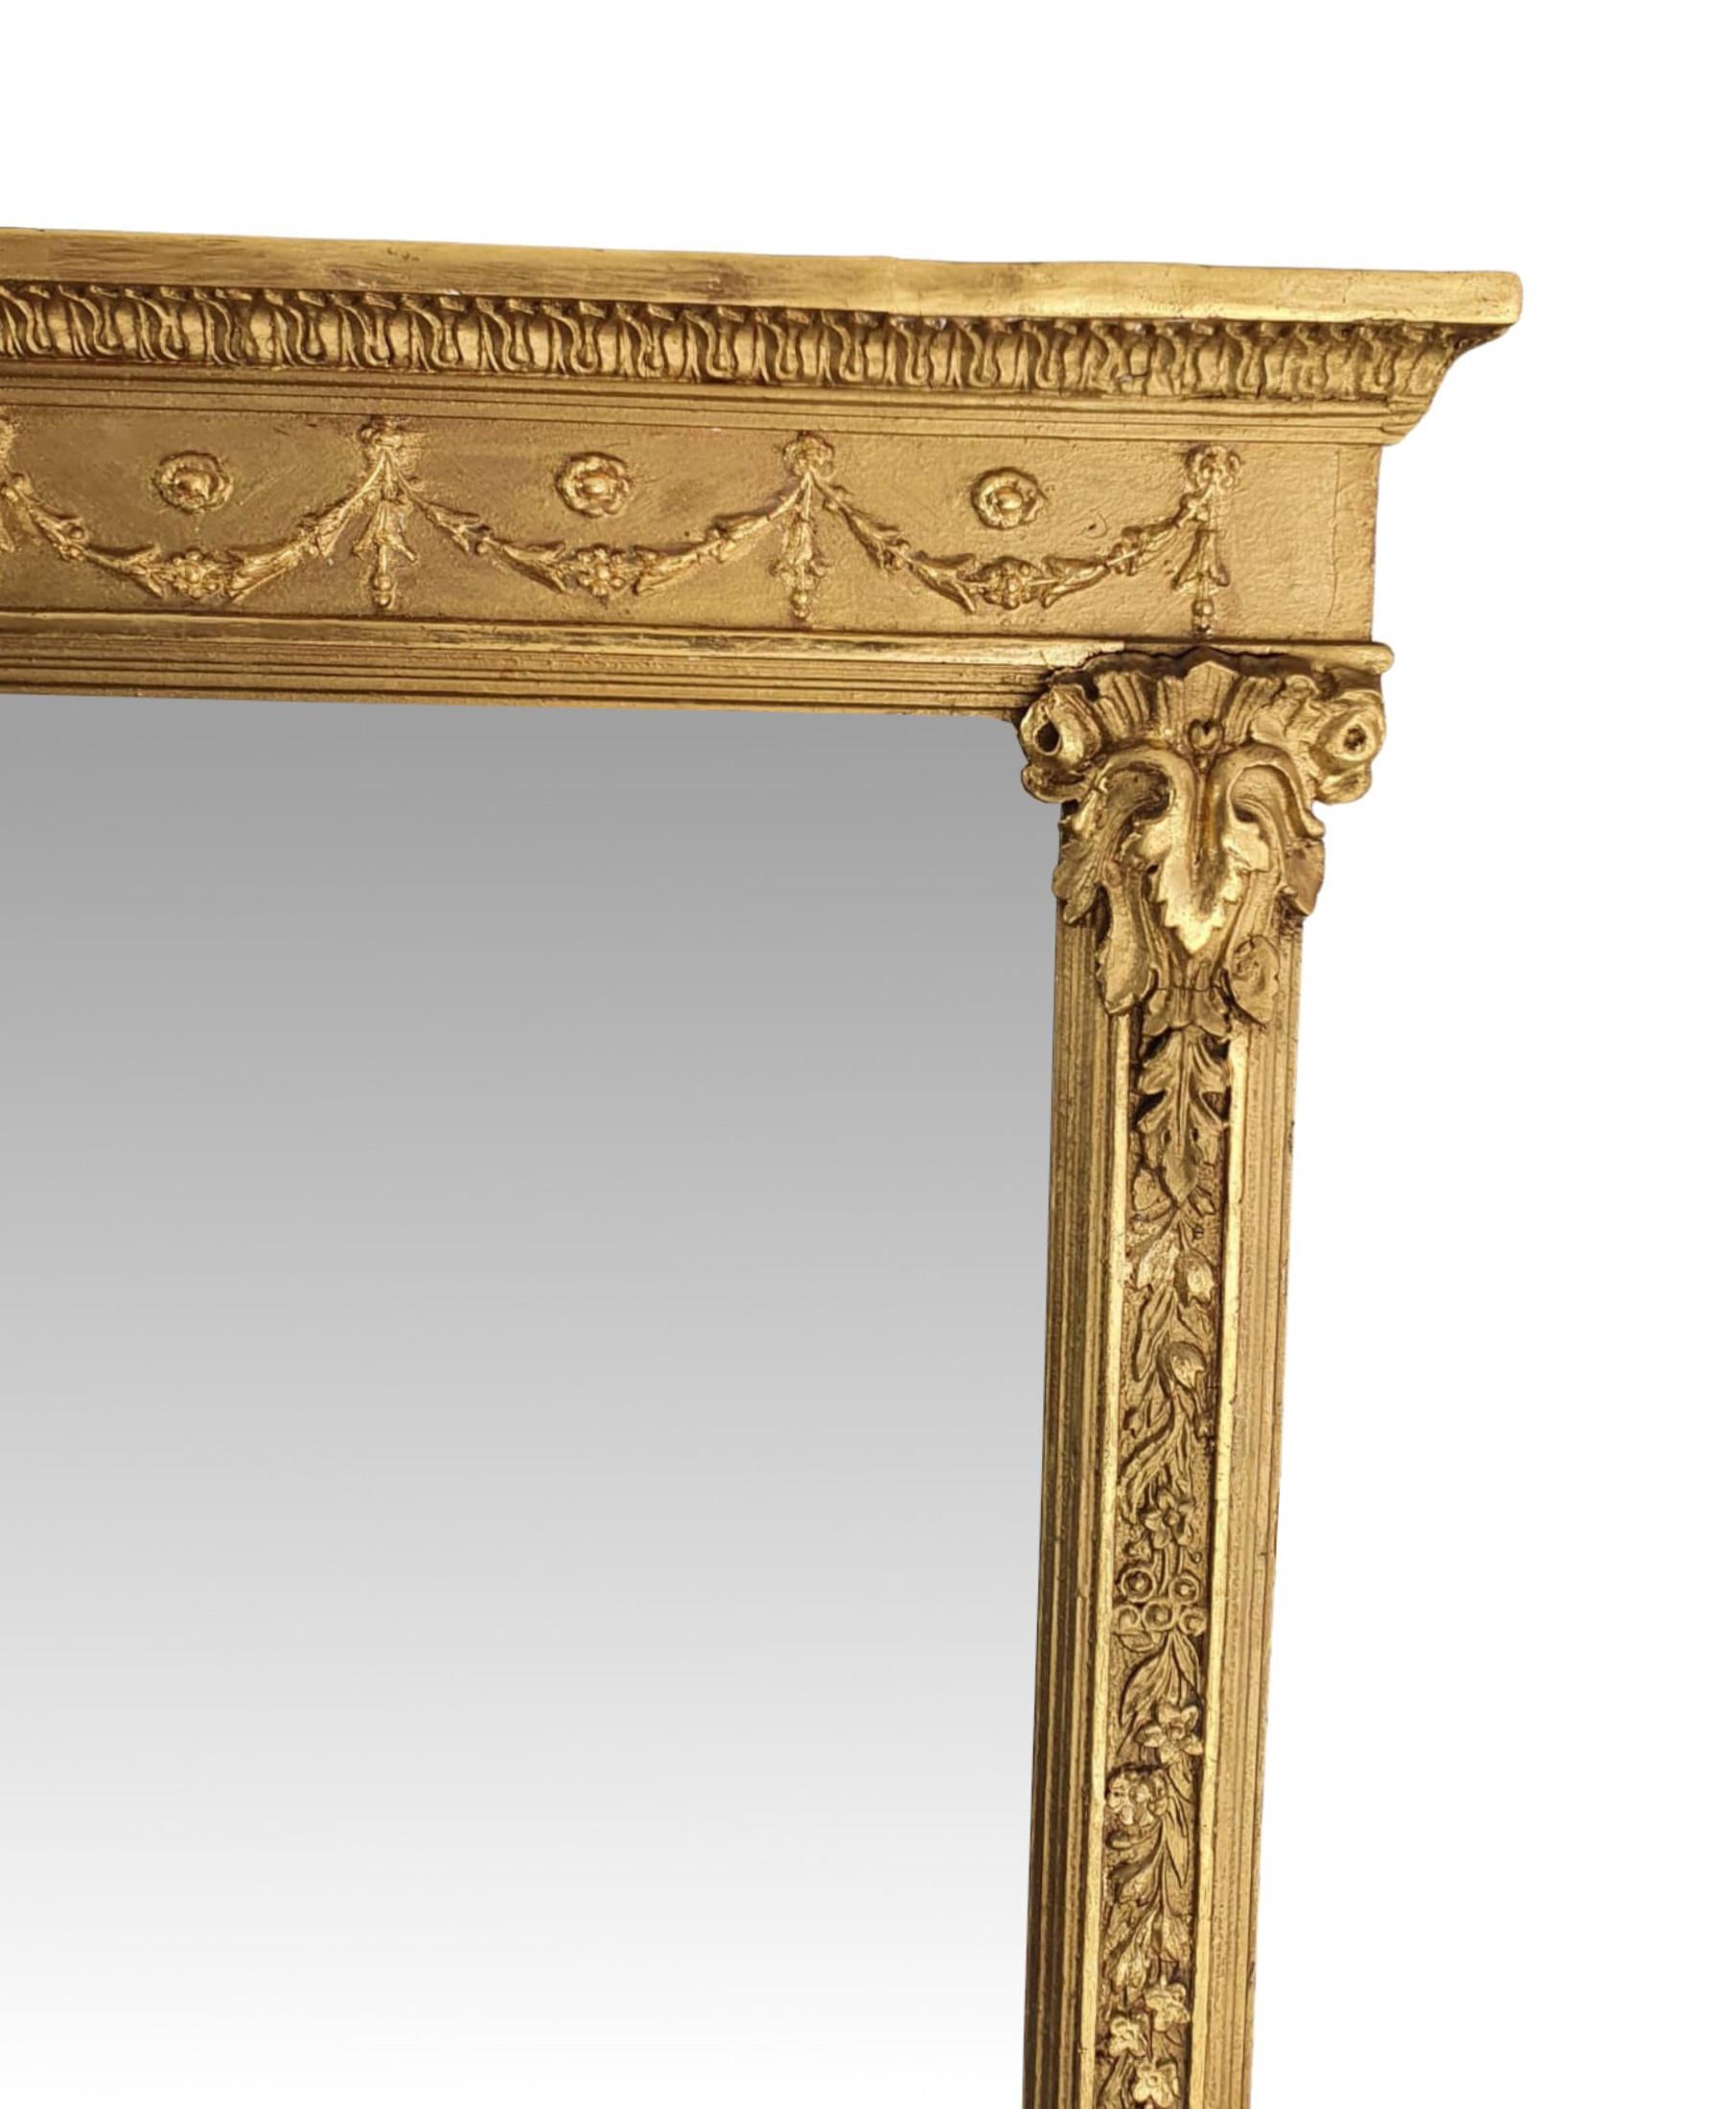 A fabulous 19th Century giltwood overmantle mirror in the manner of Adams. The mirror glass plate of rectangular form set within a beautifully hand carved and moulded giltwood frame. Surmounted with overhanging stepped pediment raised above frieze